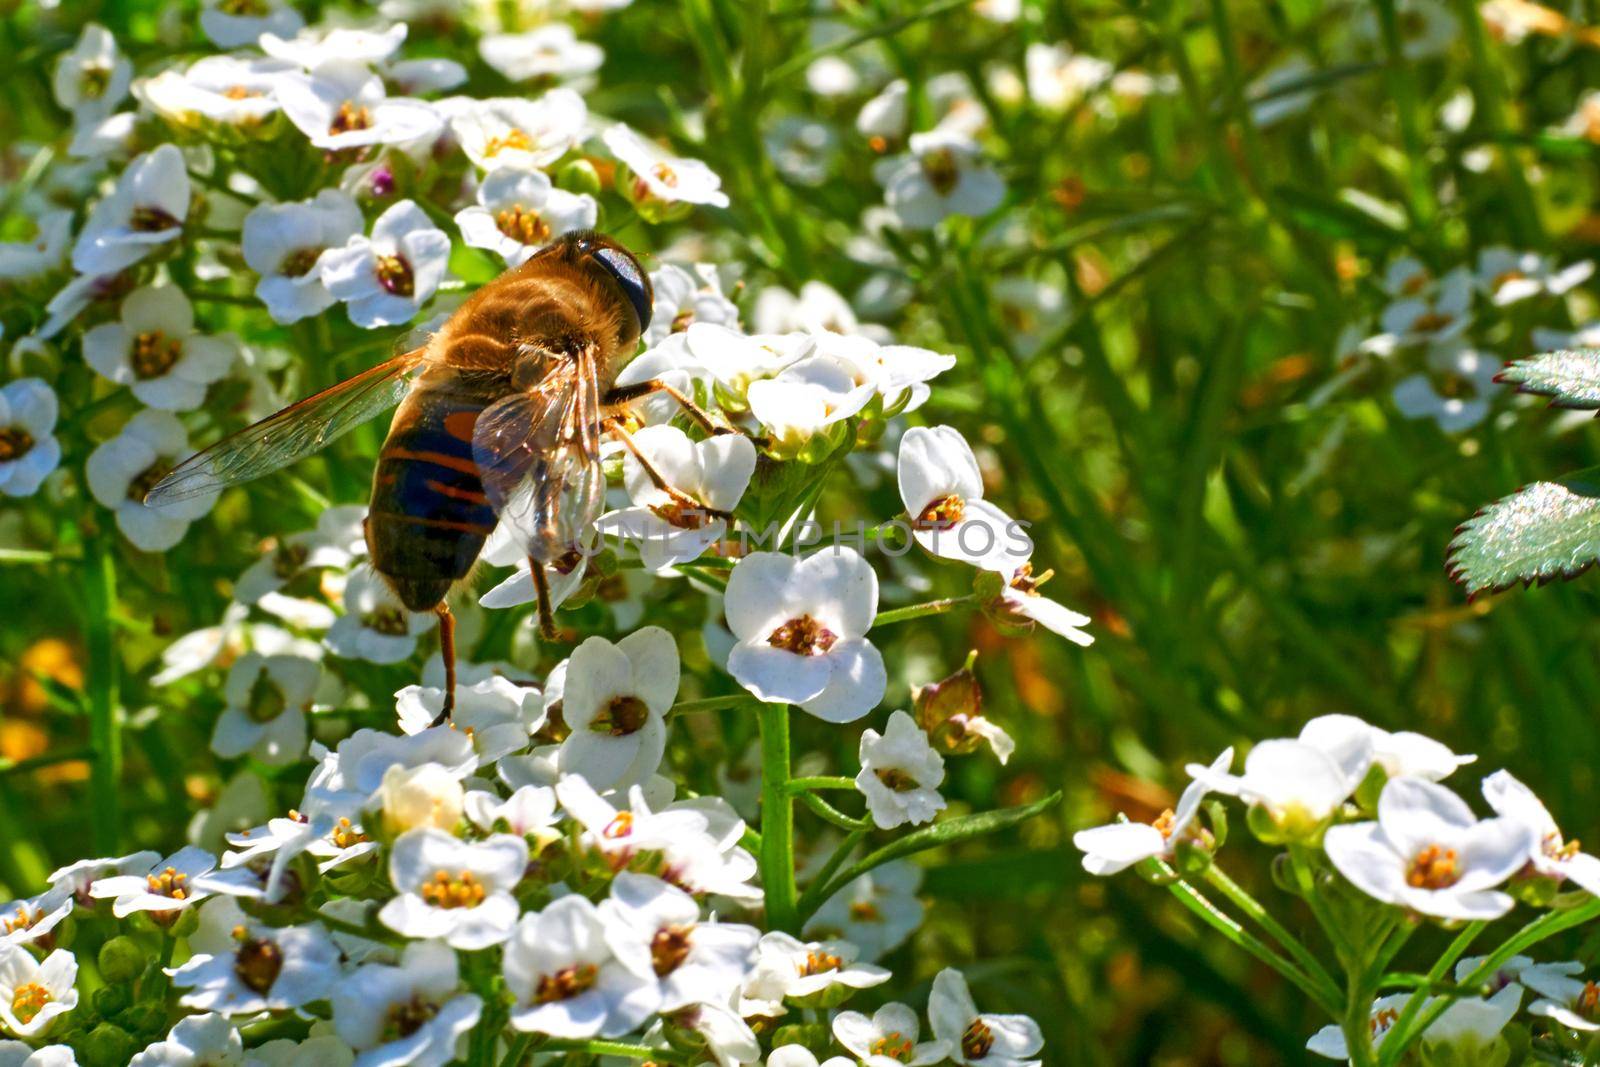 A worker bee collects honey on white fragrant flowers by jovani68